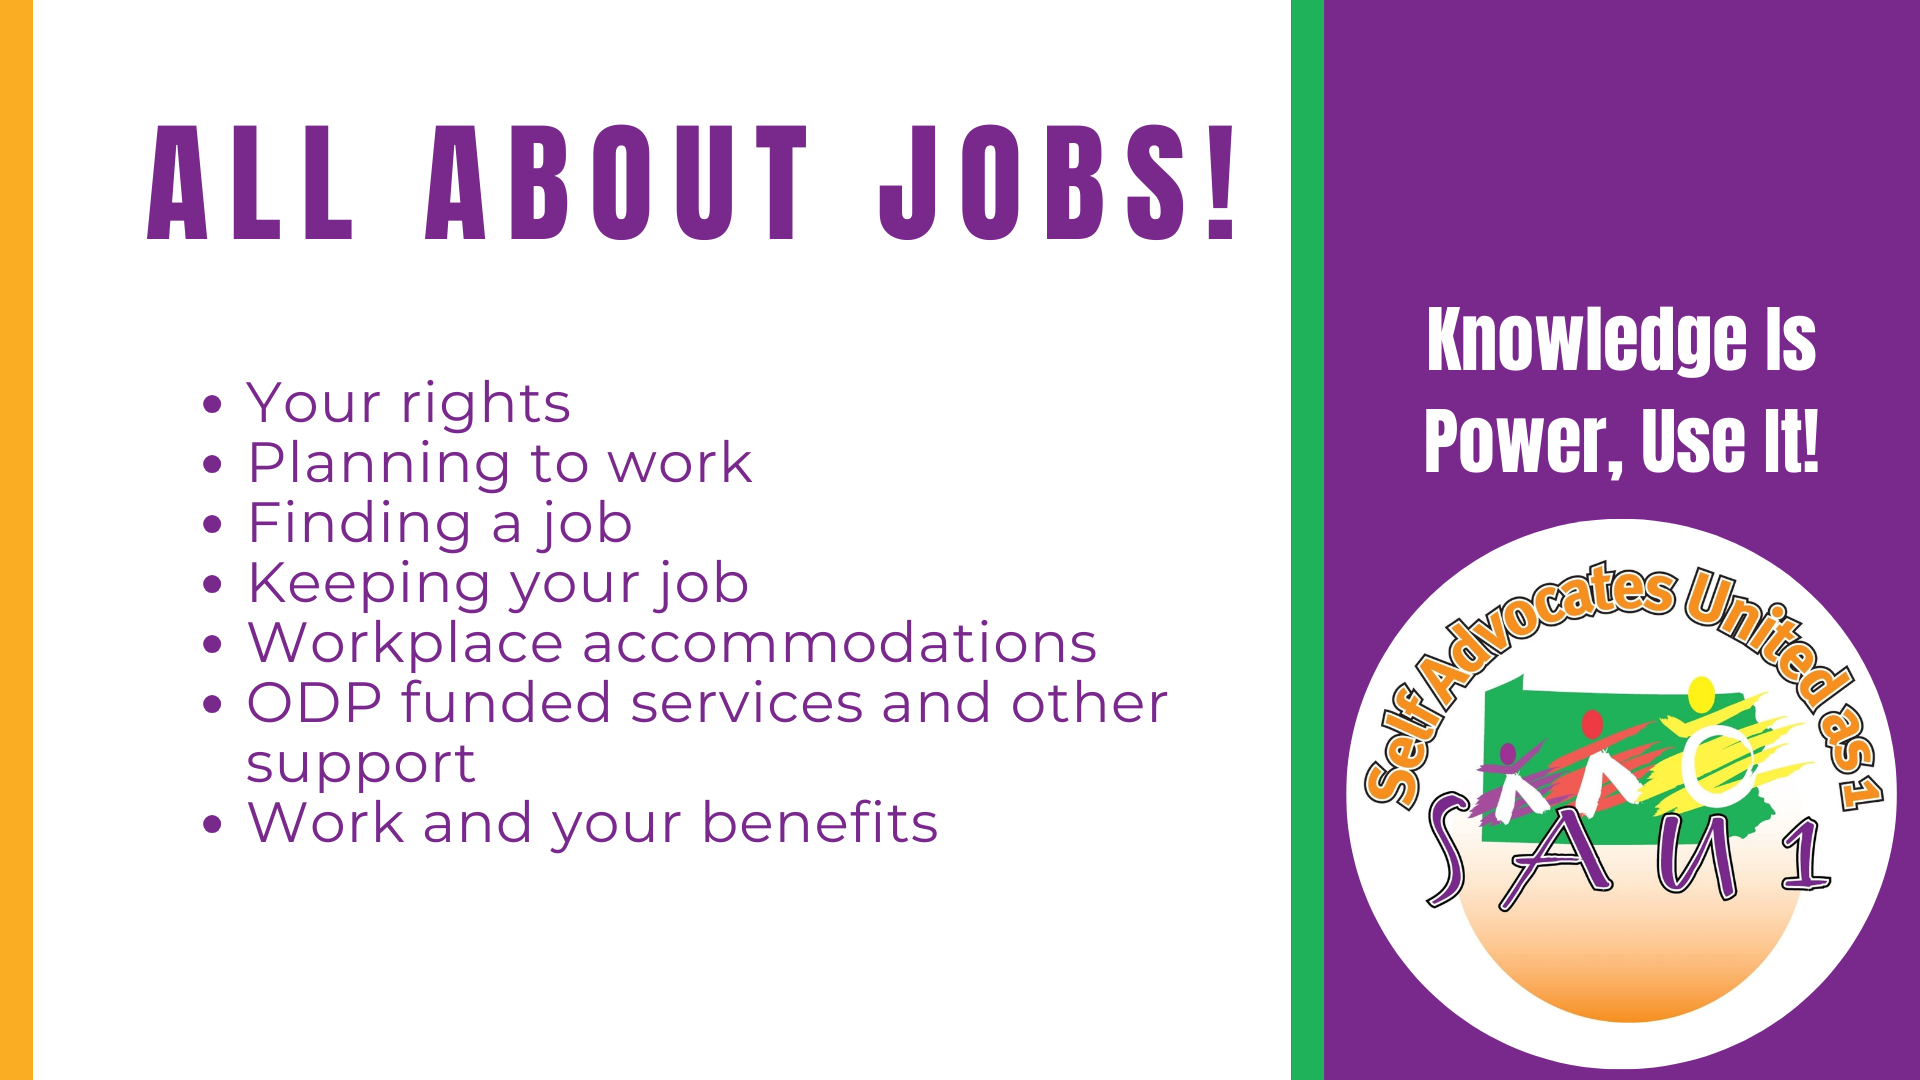 Banner. Text reads: ALL ABOUT JOBS. •Your rights •Planning to work •Finding a job Keeping your job •Workplace accommodations •ODP funded services and other support •Work and your benefits. SAU1 logo to right with text above it that reads Knowledge is Power, Use It!